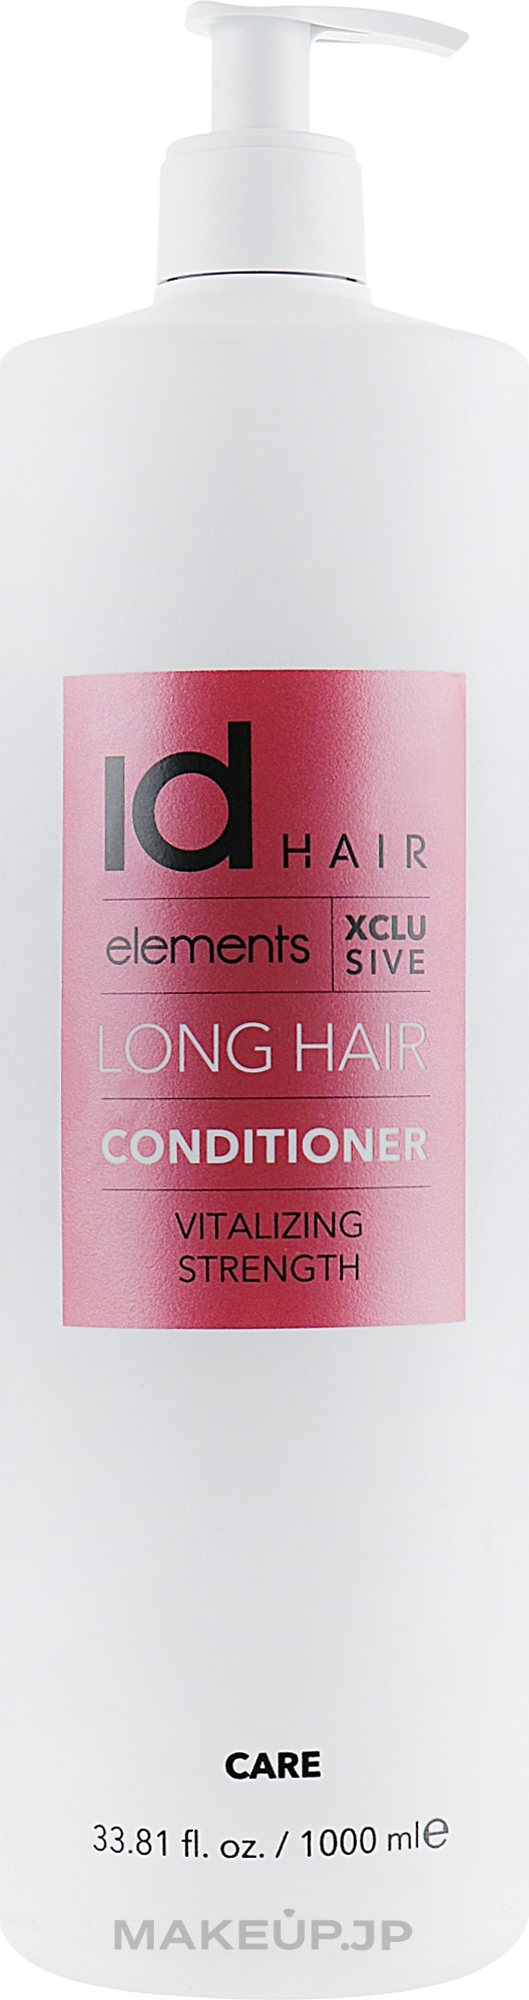 Long Hair Conditioner - idHair Elements Xclusive Long Hair Conditioner — photo 1000 ml